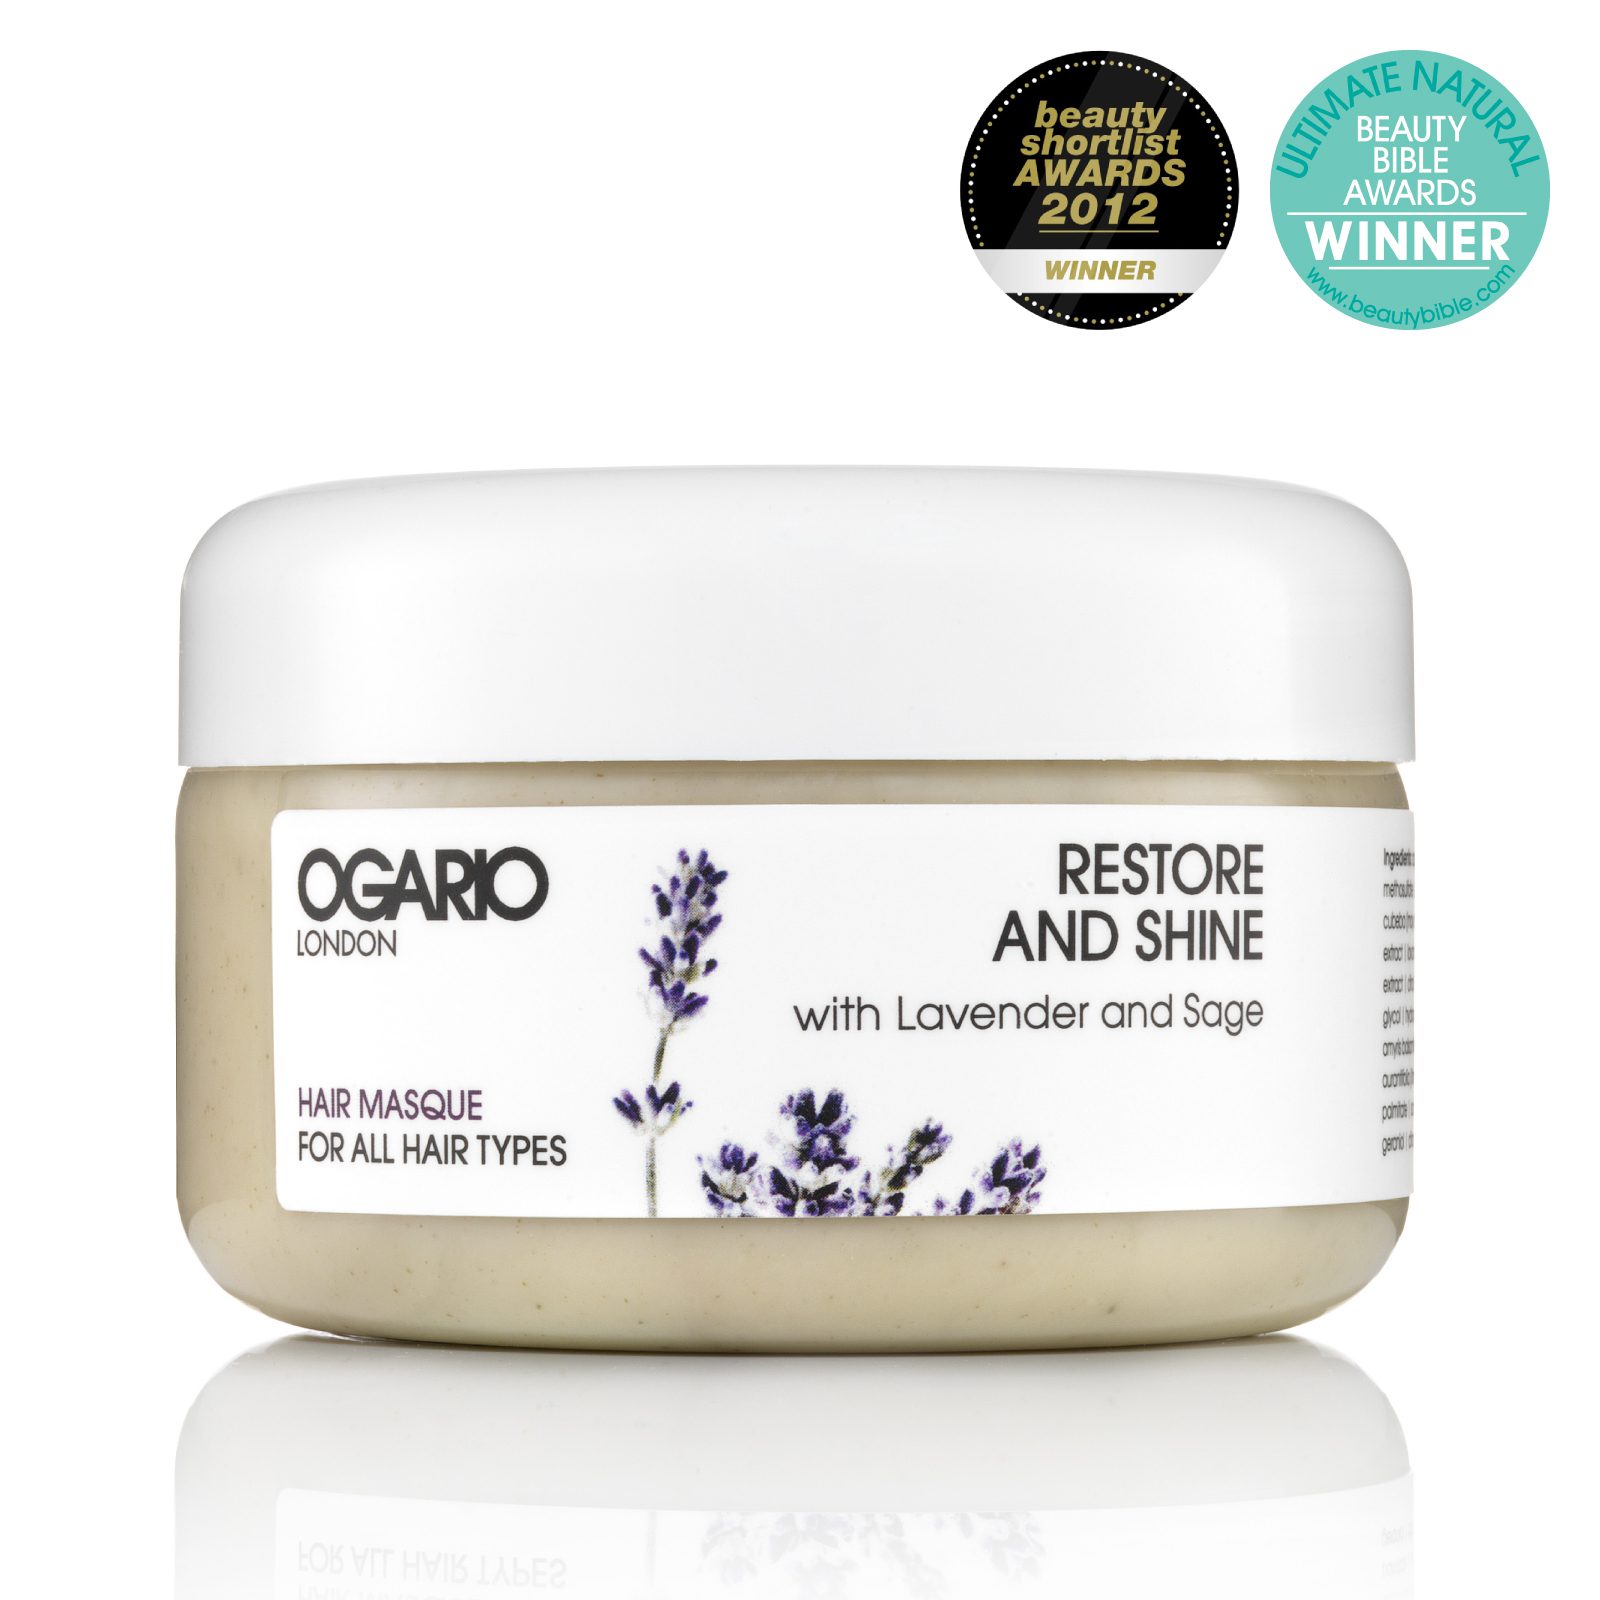 OGARIO Restore and Shine Hair Masque; Hair treatment for dry curly hair